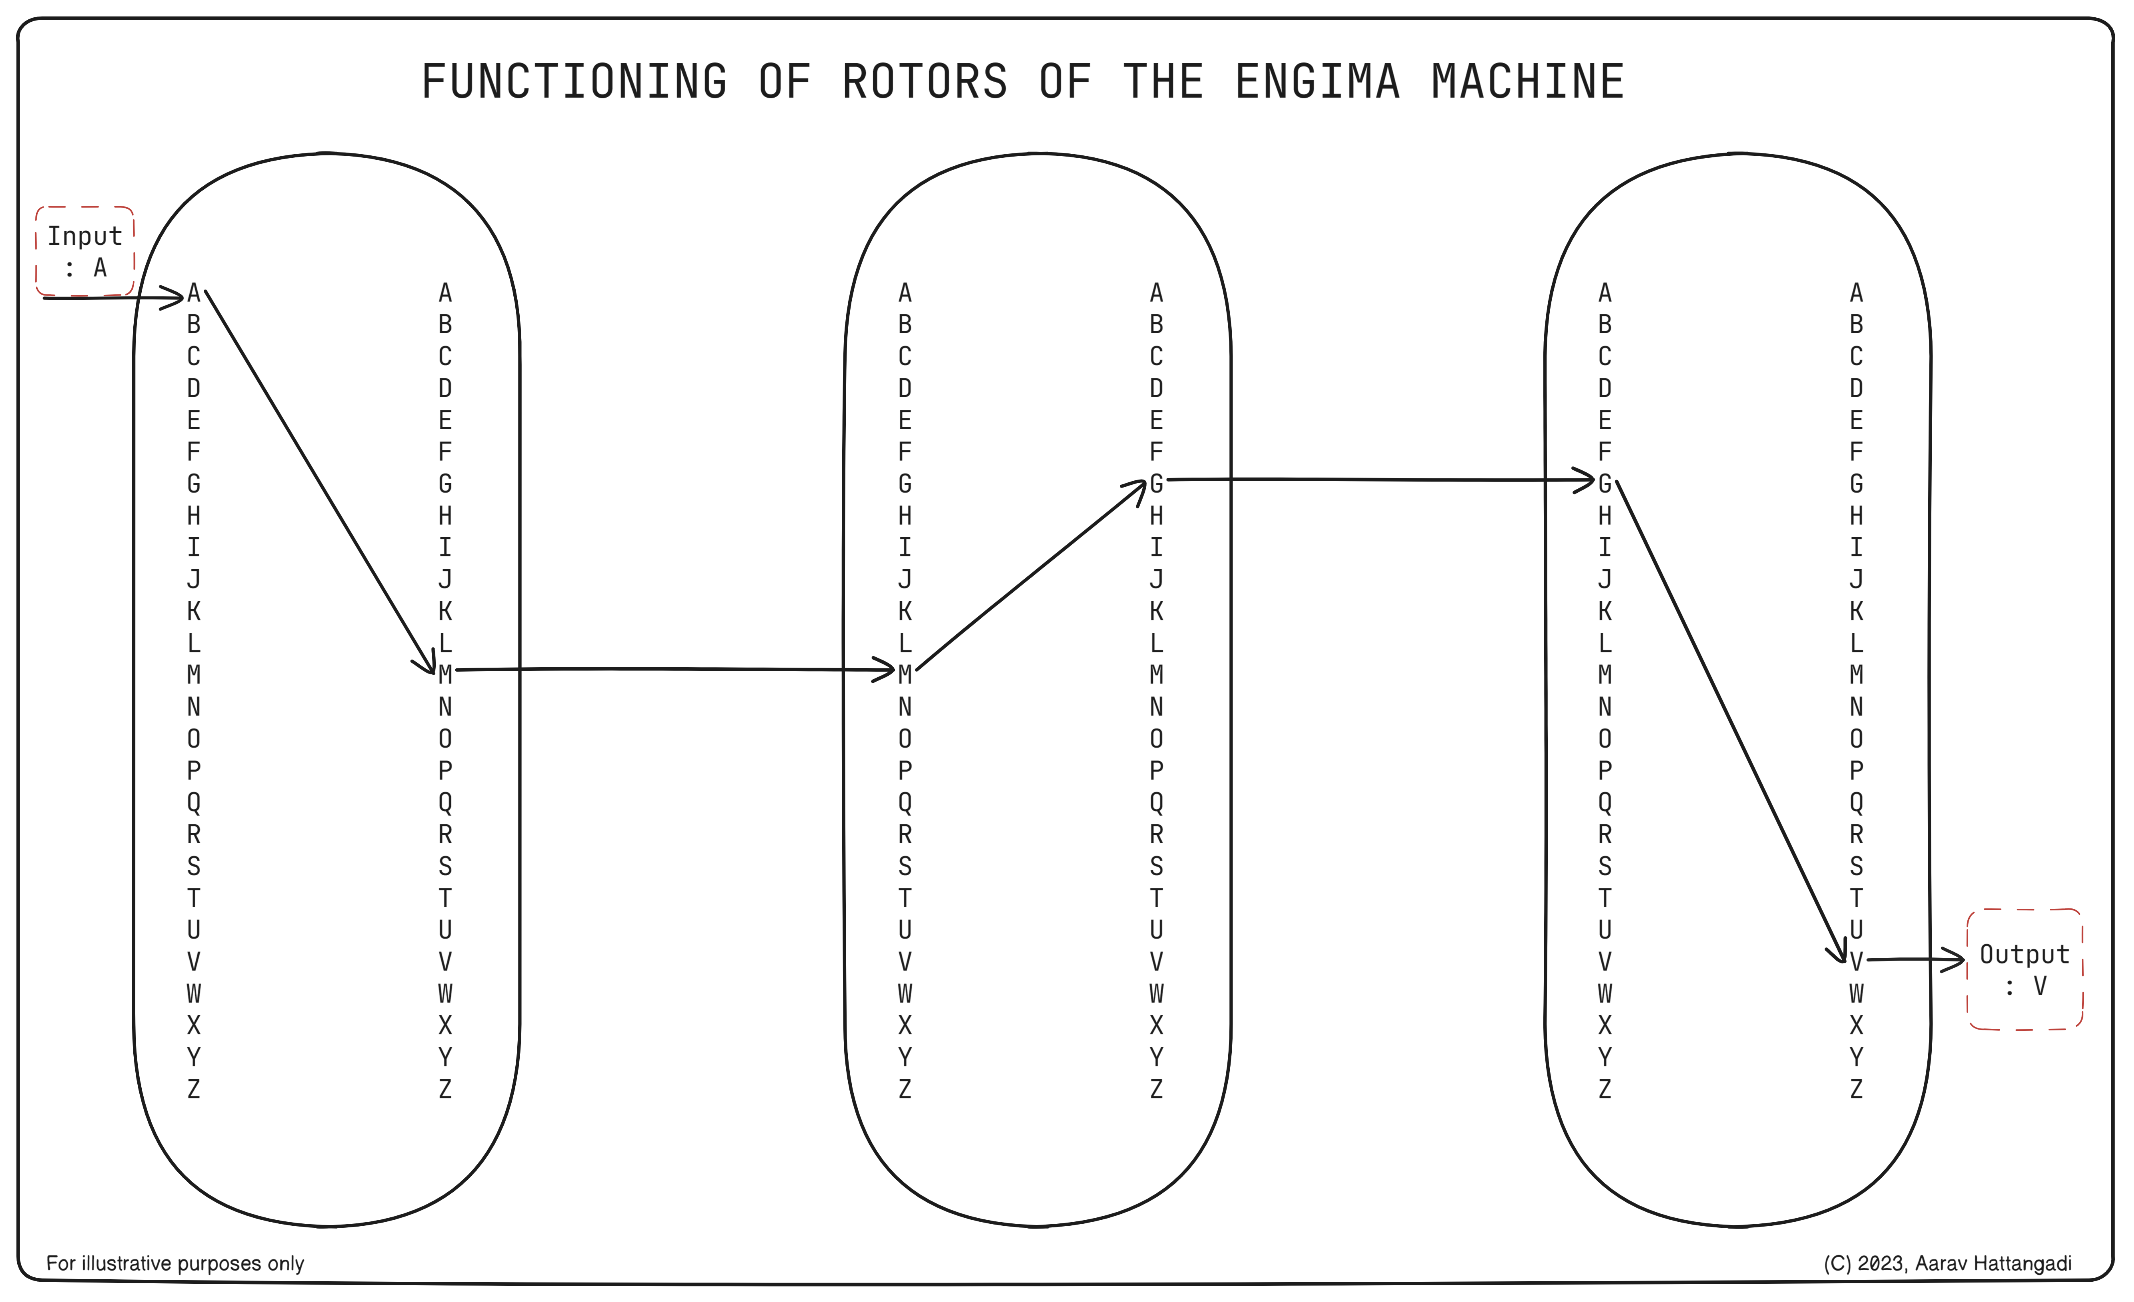 An image explaining how the rotors of enigma functioned